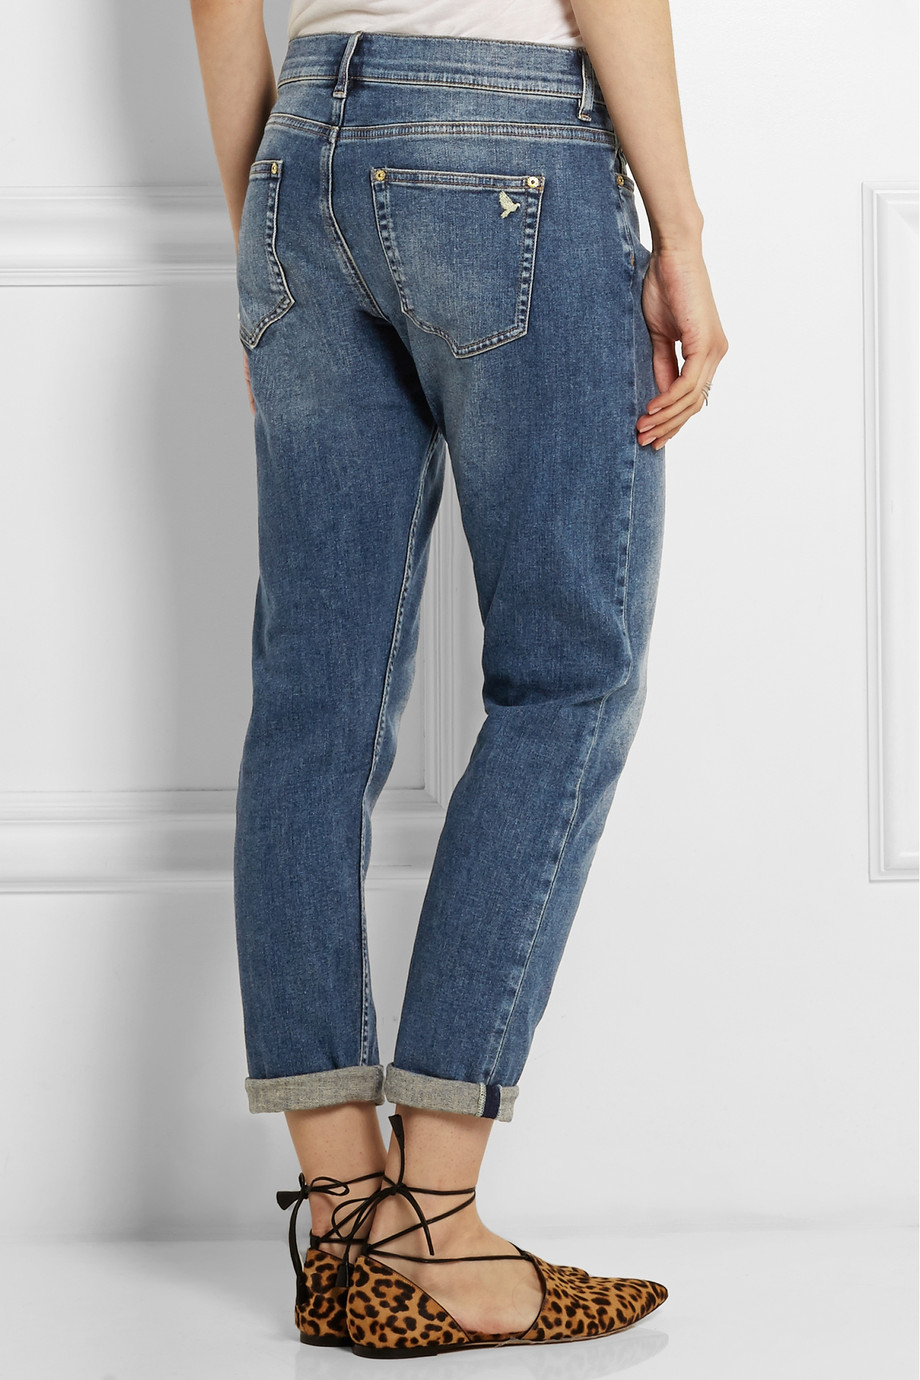 Lyst - M.I.H Jeans The Tomboy Mid-Rise Slim Boyfriend Jeans in Blue